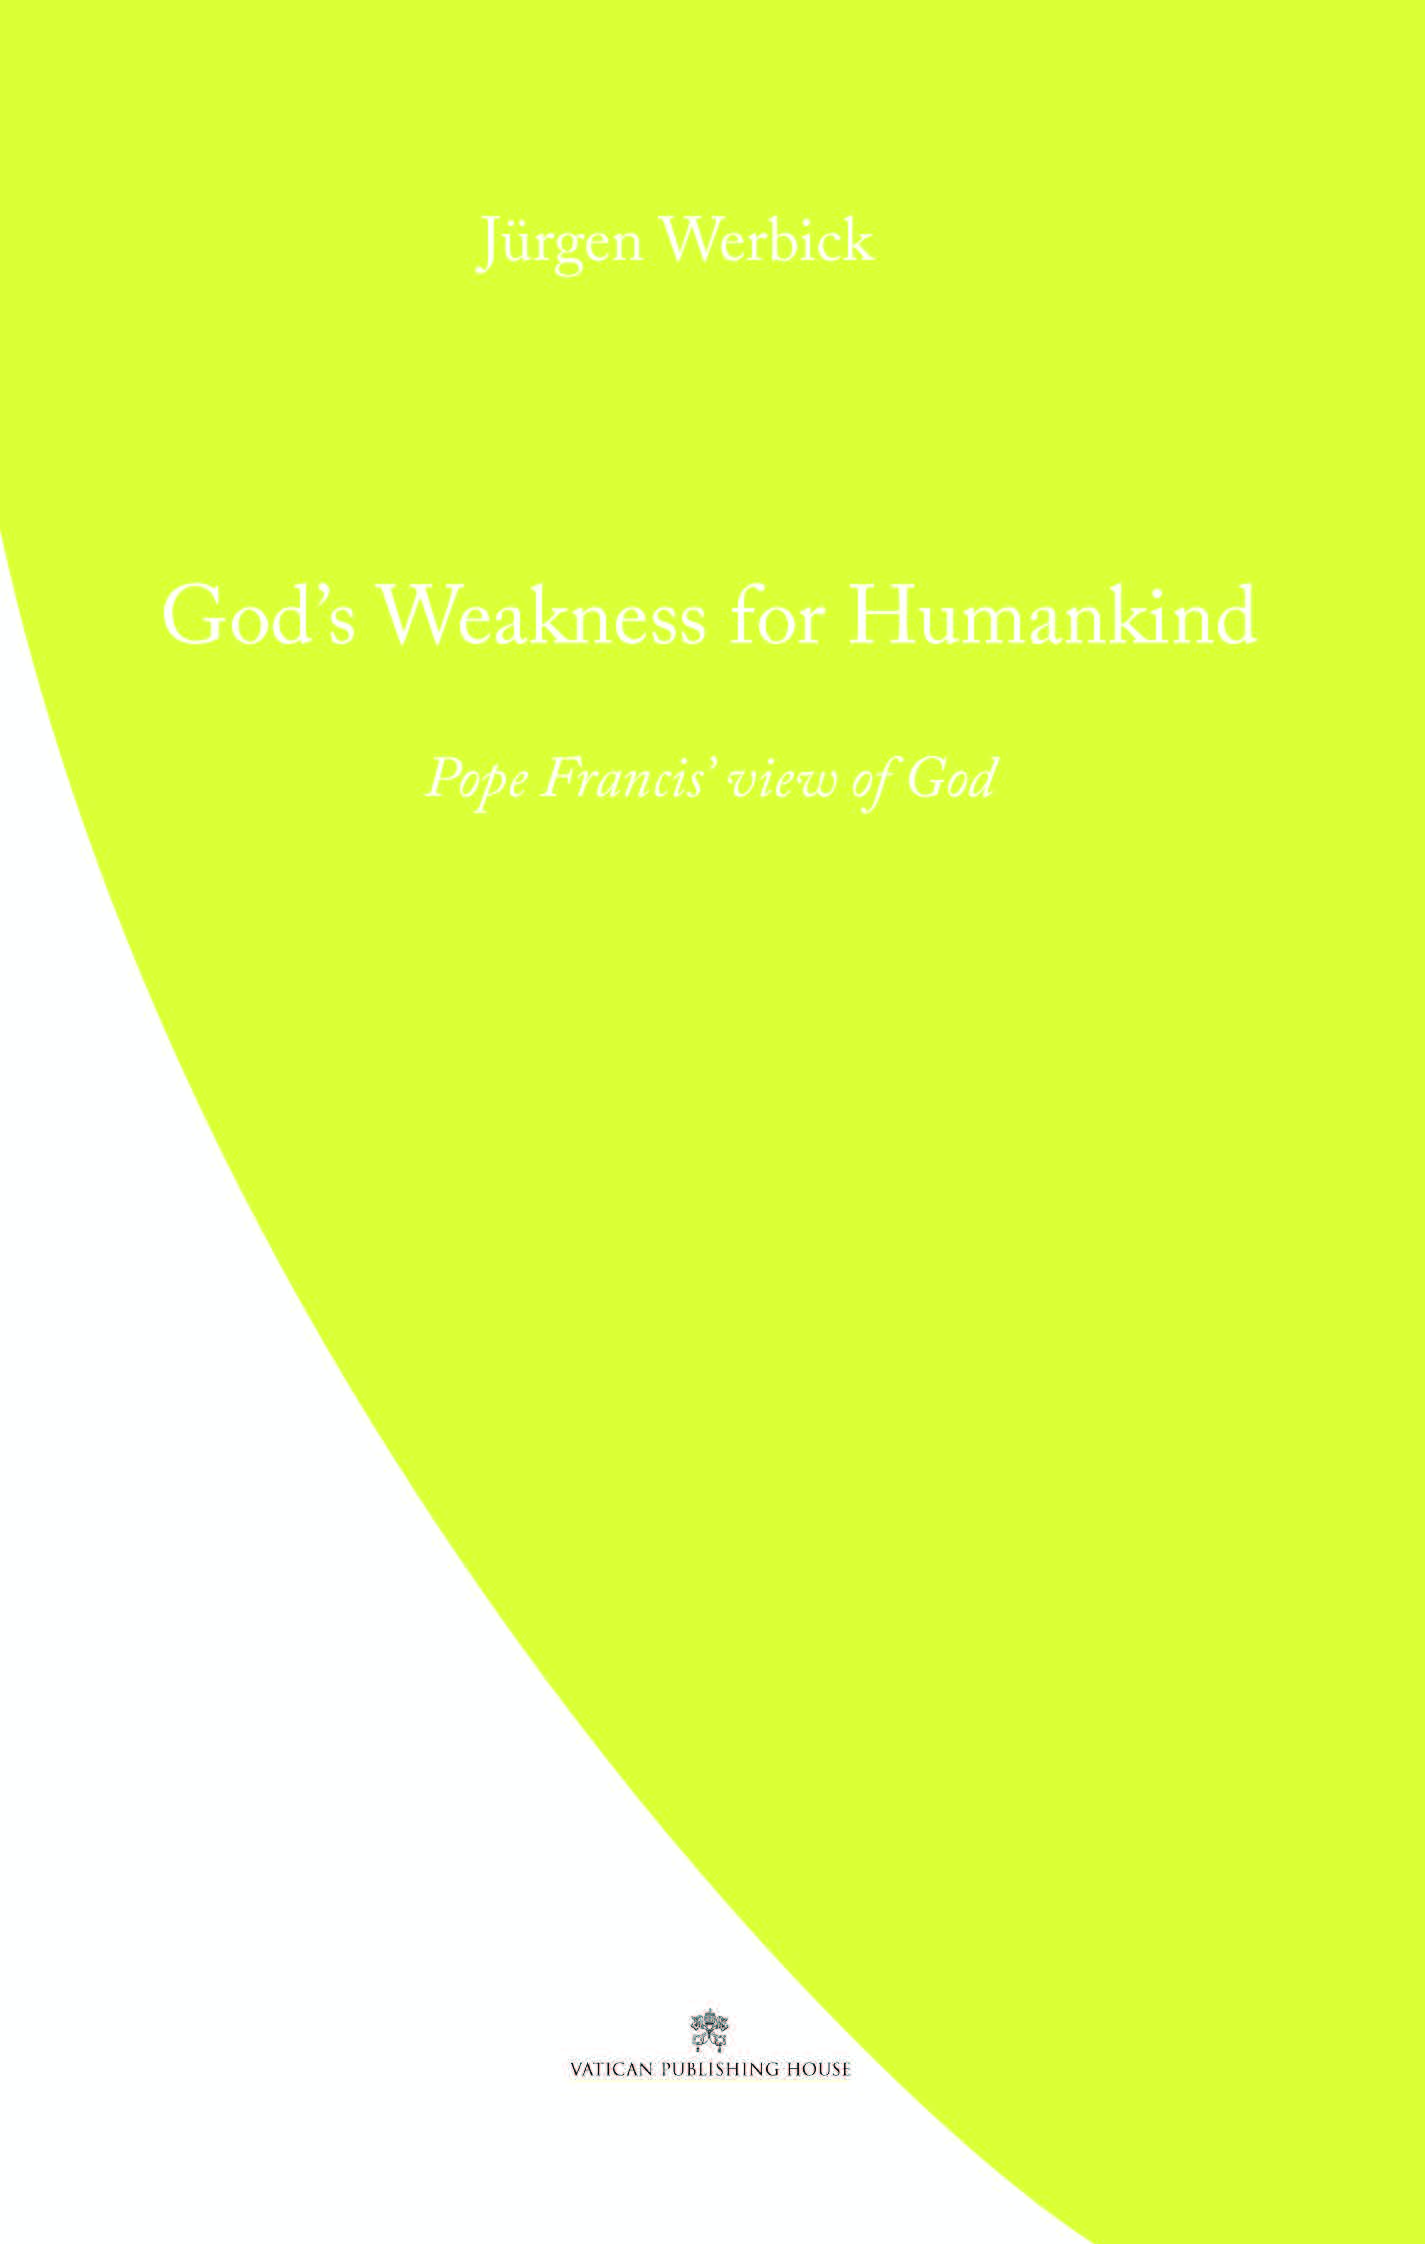 God's Weakness for Humankind  Pope Francis' view of God / Jurgen Werbick